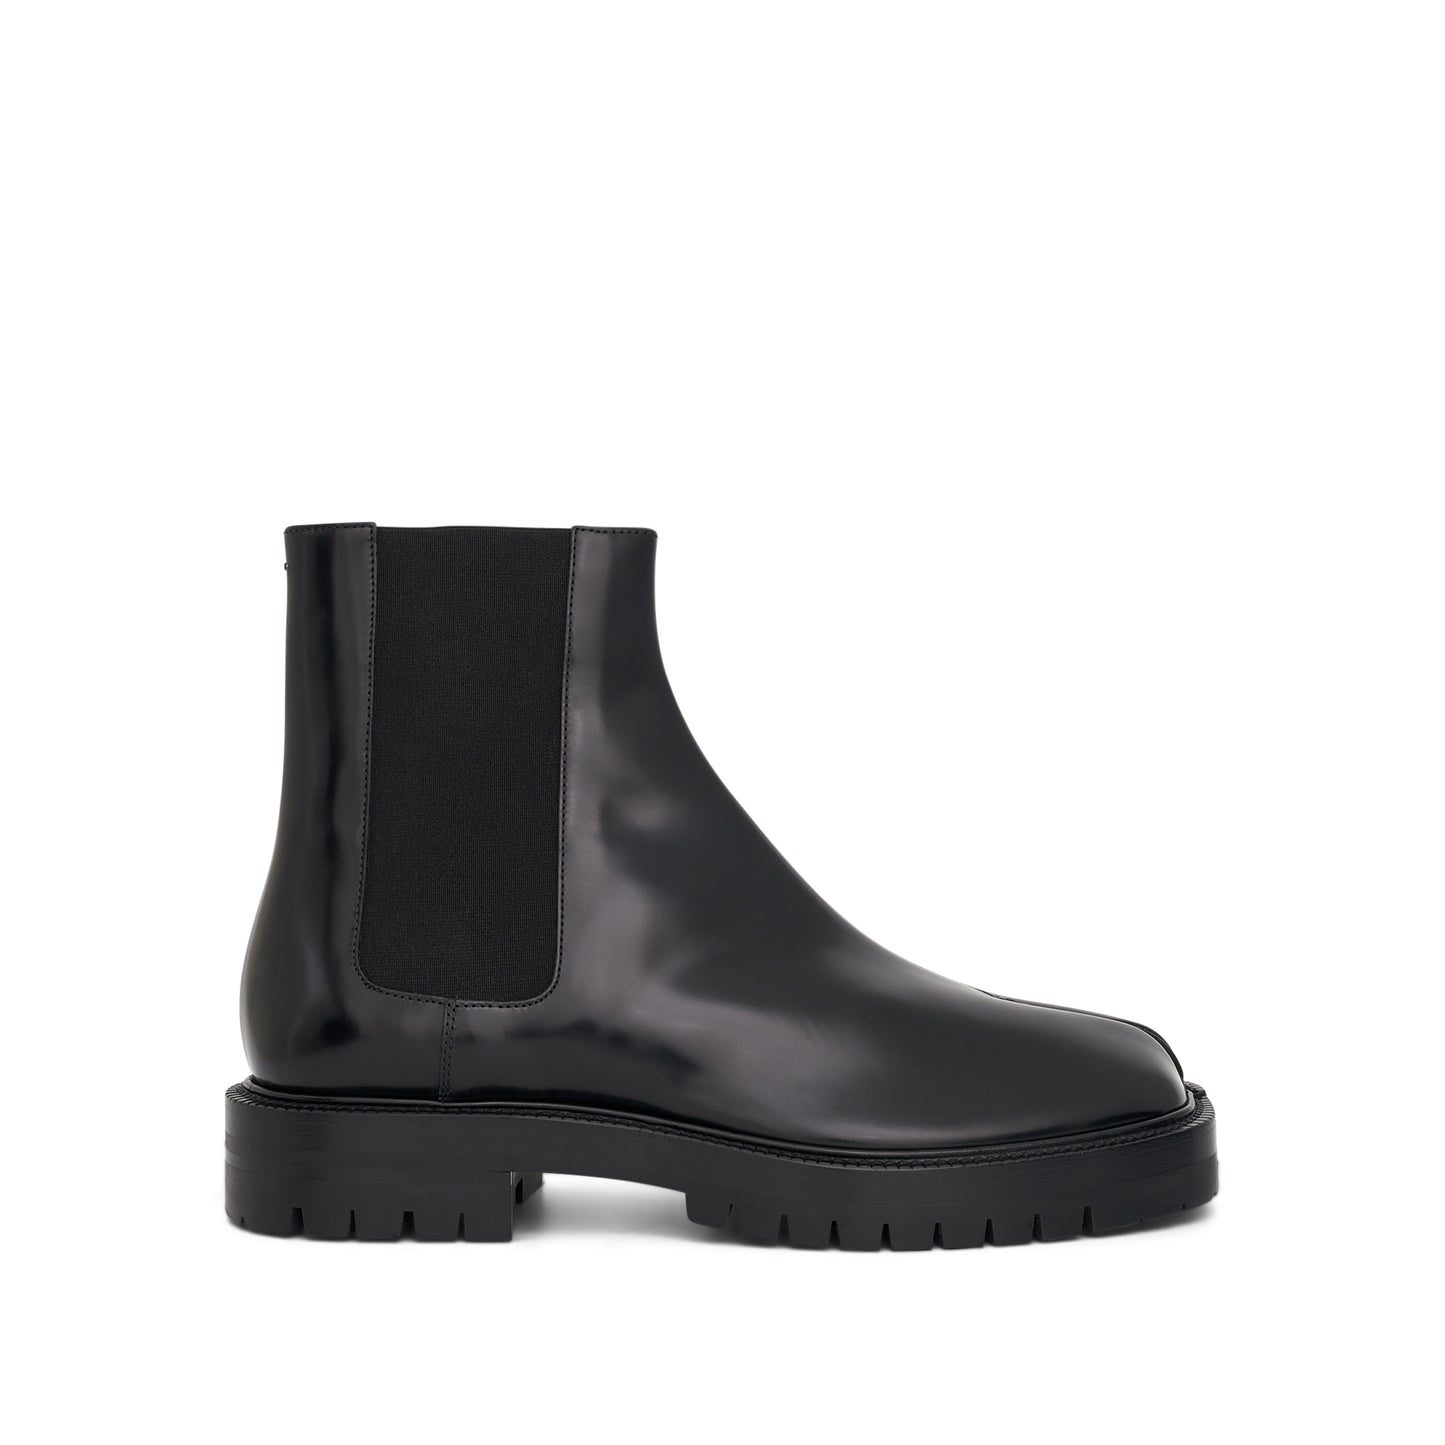 Tabi County Chelsea Boots in Black